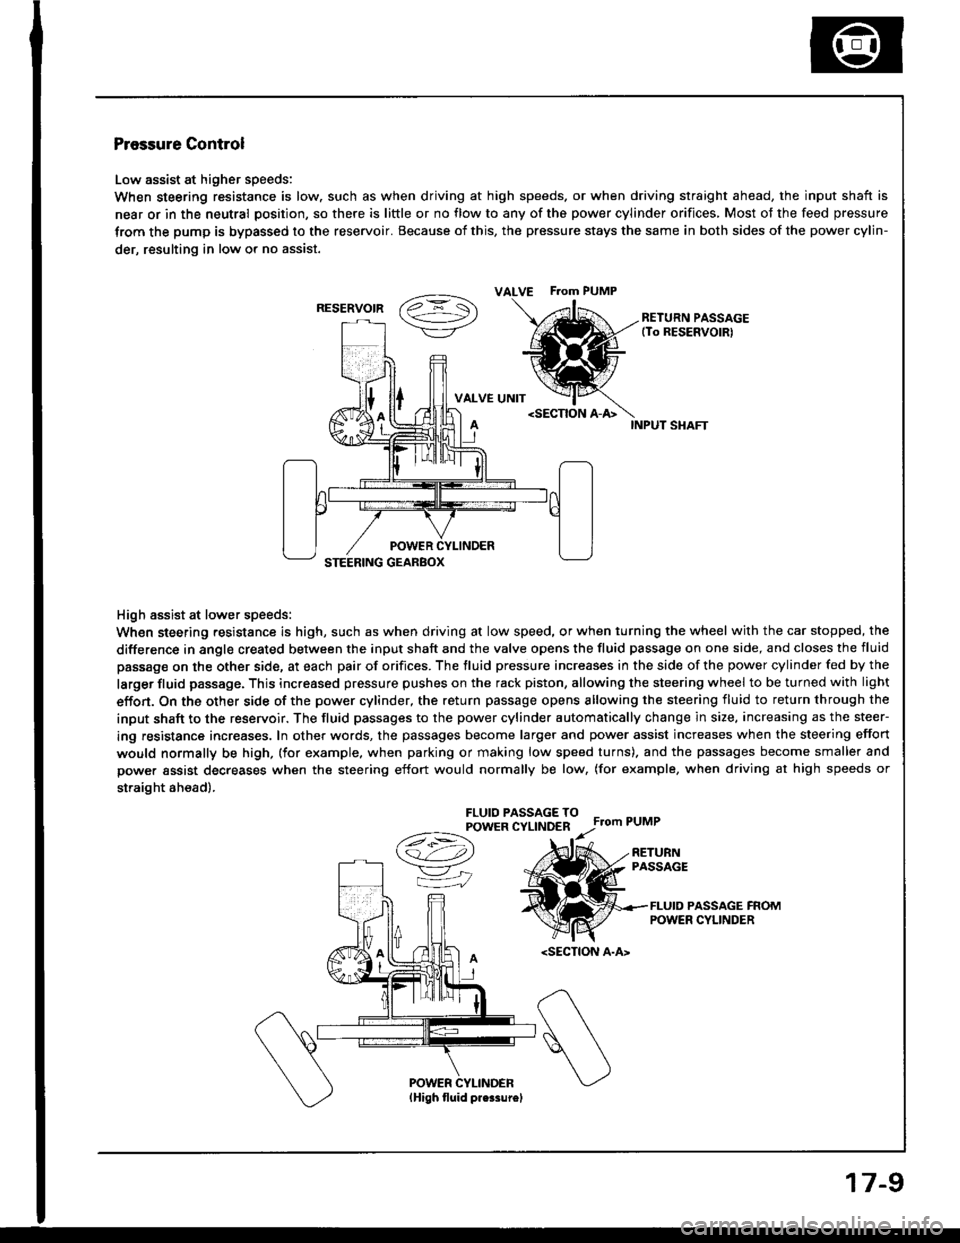 ACURA INTEGRA 1994  Service Repair Manual Pressure Control
Low assist at higher speeds:
When steering resistance is low. such as when driving at high speeds. or when driving straight ahead, the input shaft is
near or in the neutral position, 